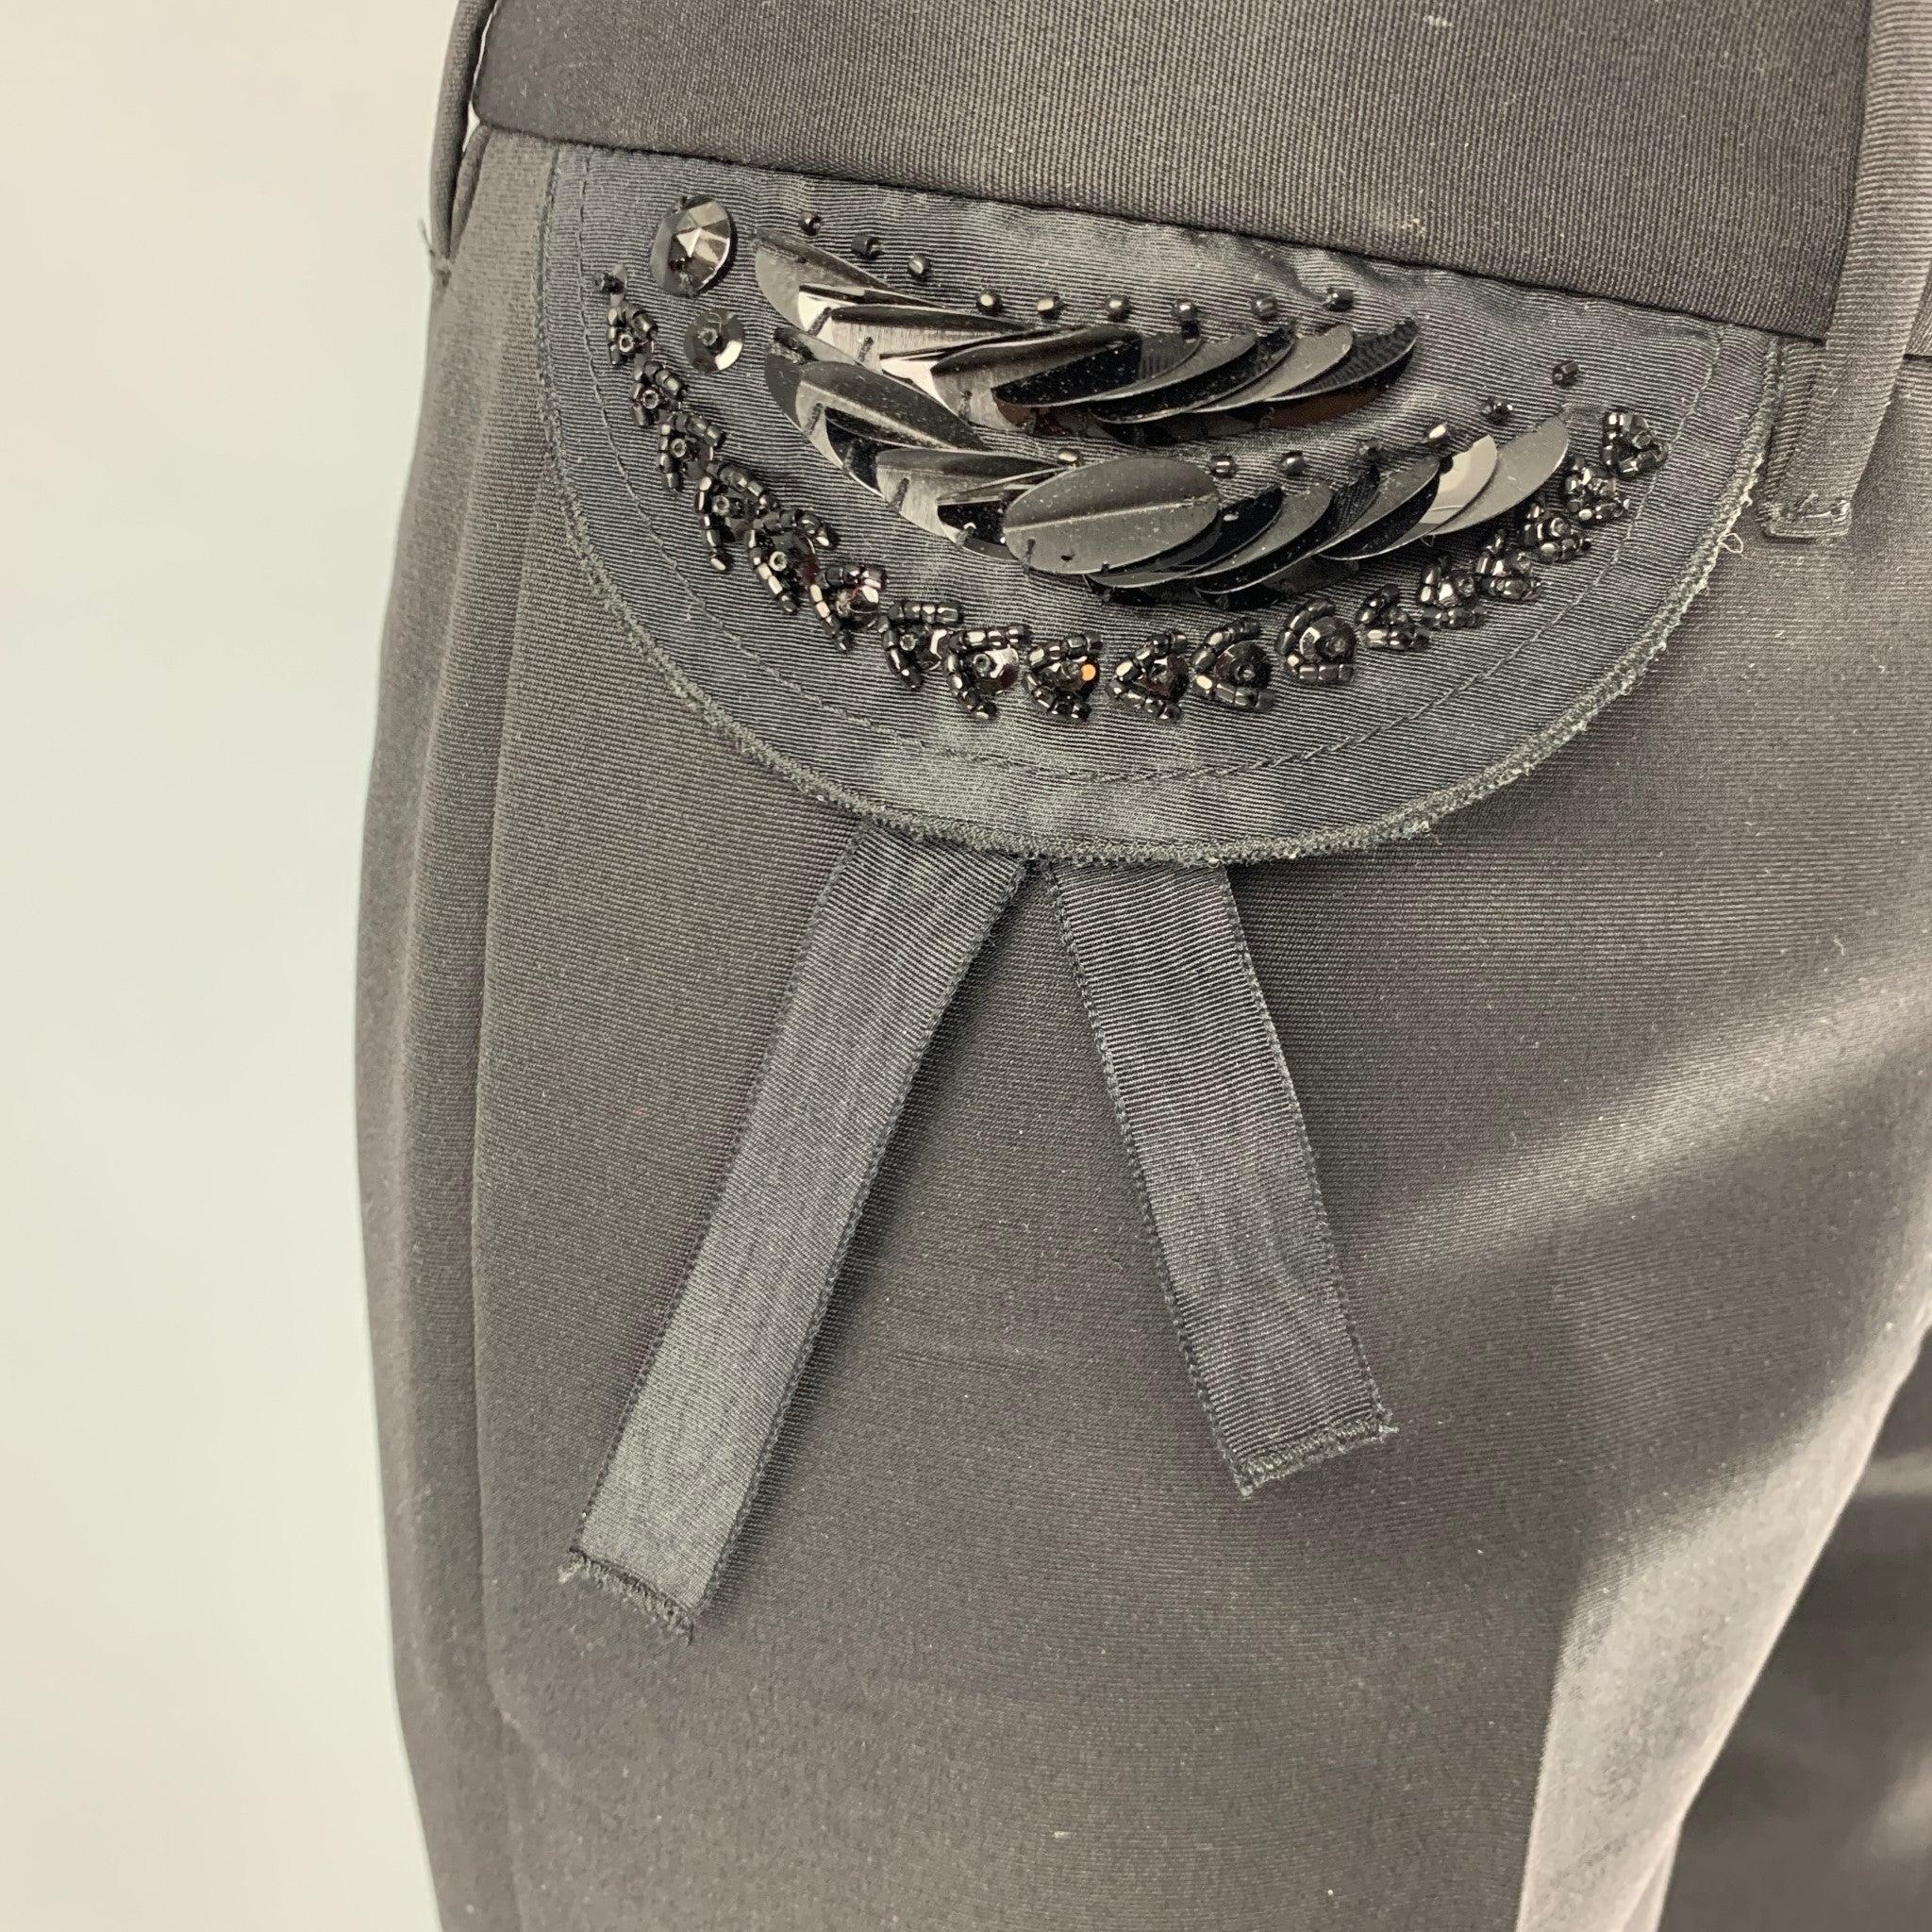 PRADA dress pants comes in a virgin wool featuring a beaded pocket detail, straight style, front tab, and a zip fly closure. Made in Italy.Good Pre-Owned Condition. Moderate Signs of Wear. As- Is. 

Marked:   I
40 

Measurements: 
  Waist: 29 inches